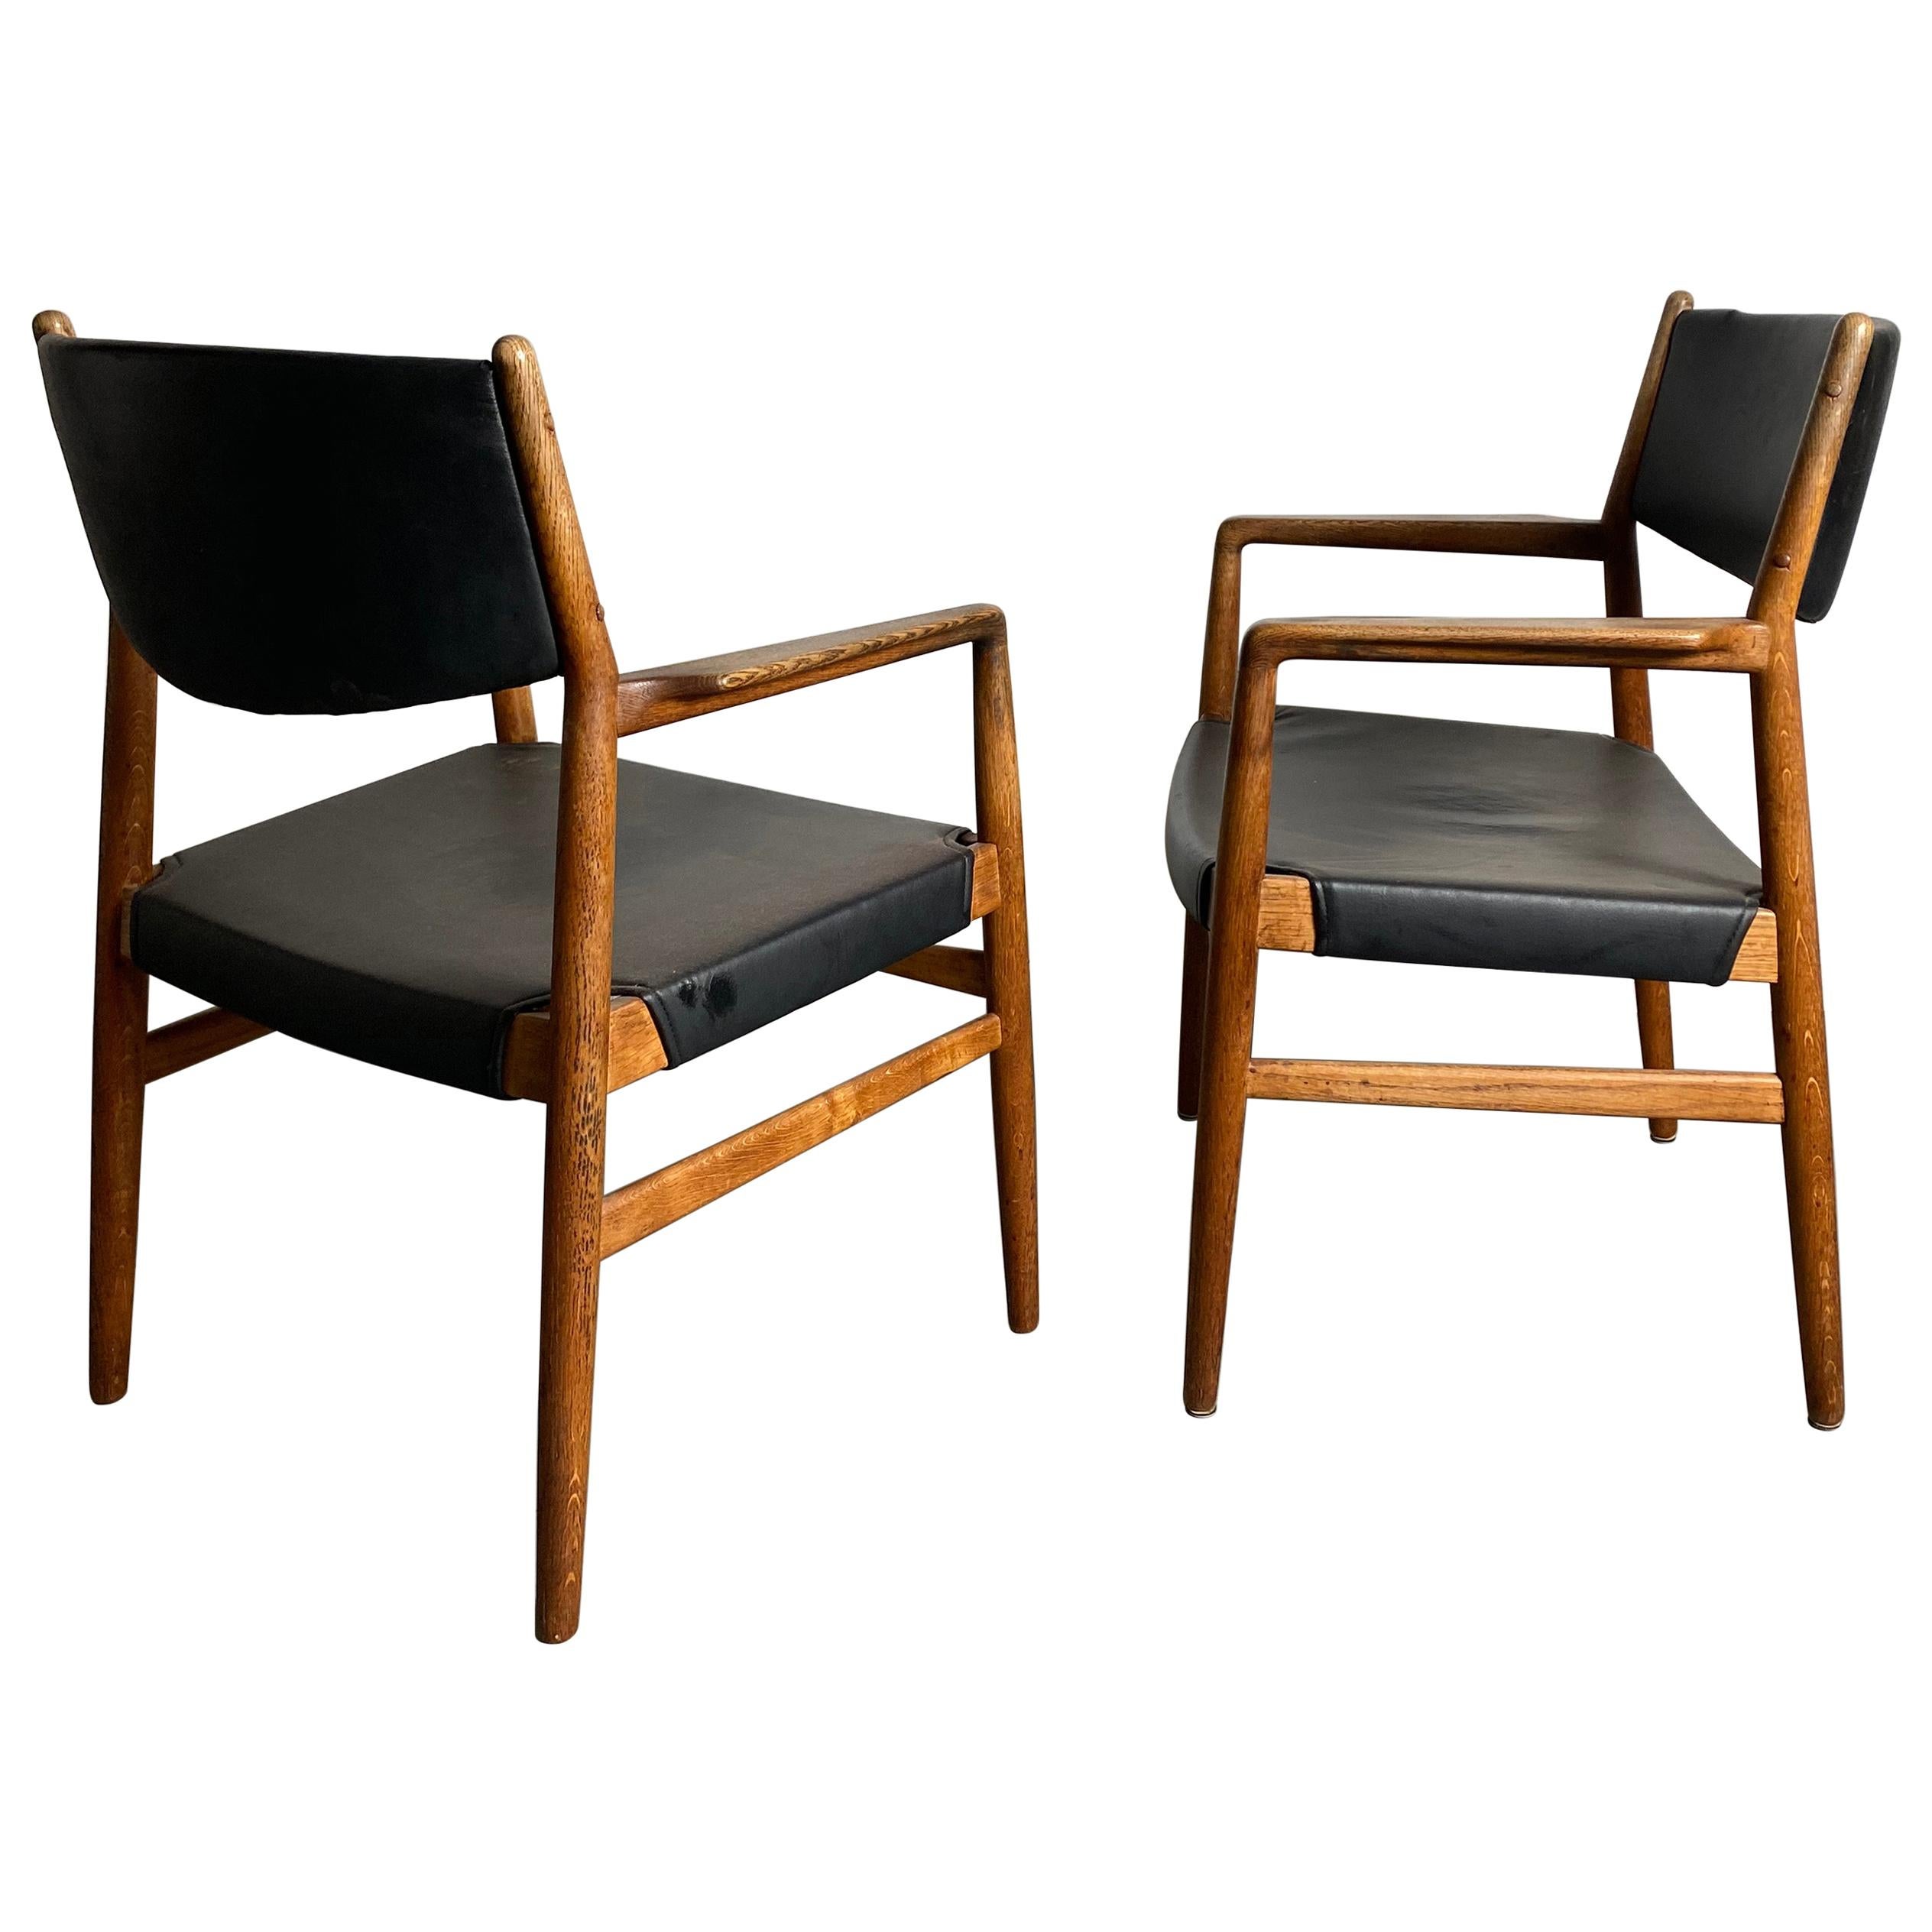 Classic Danish Armchairs in Solid Oak by Andersen, J.C.A. Jensen For Sale at 1stDibs